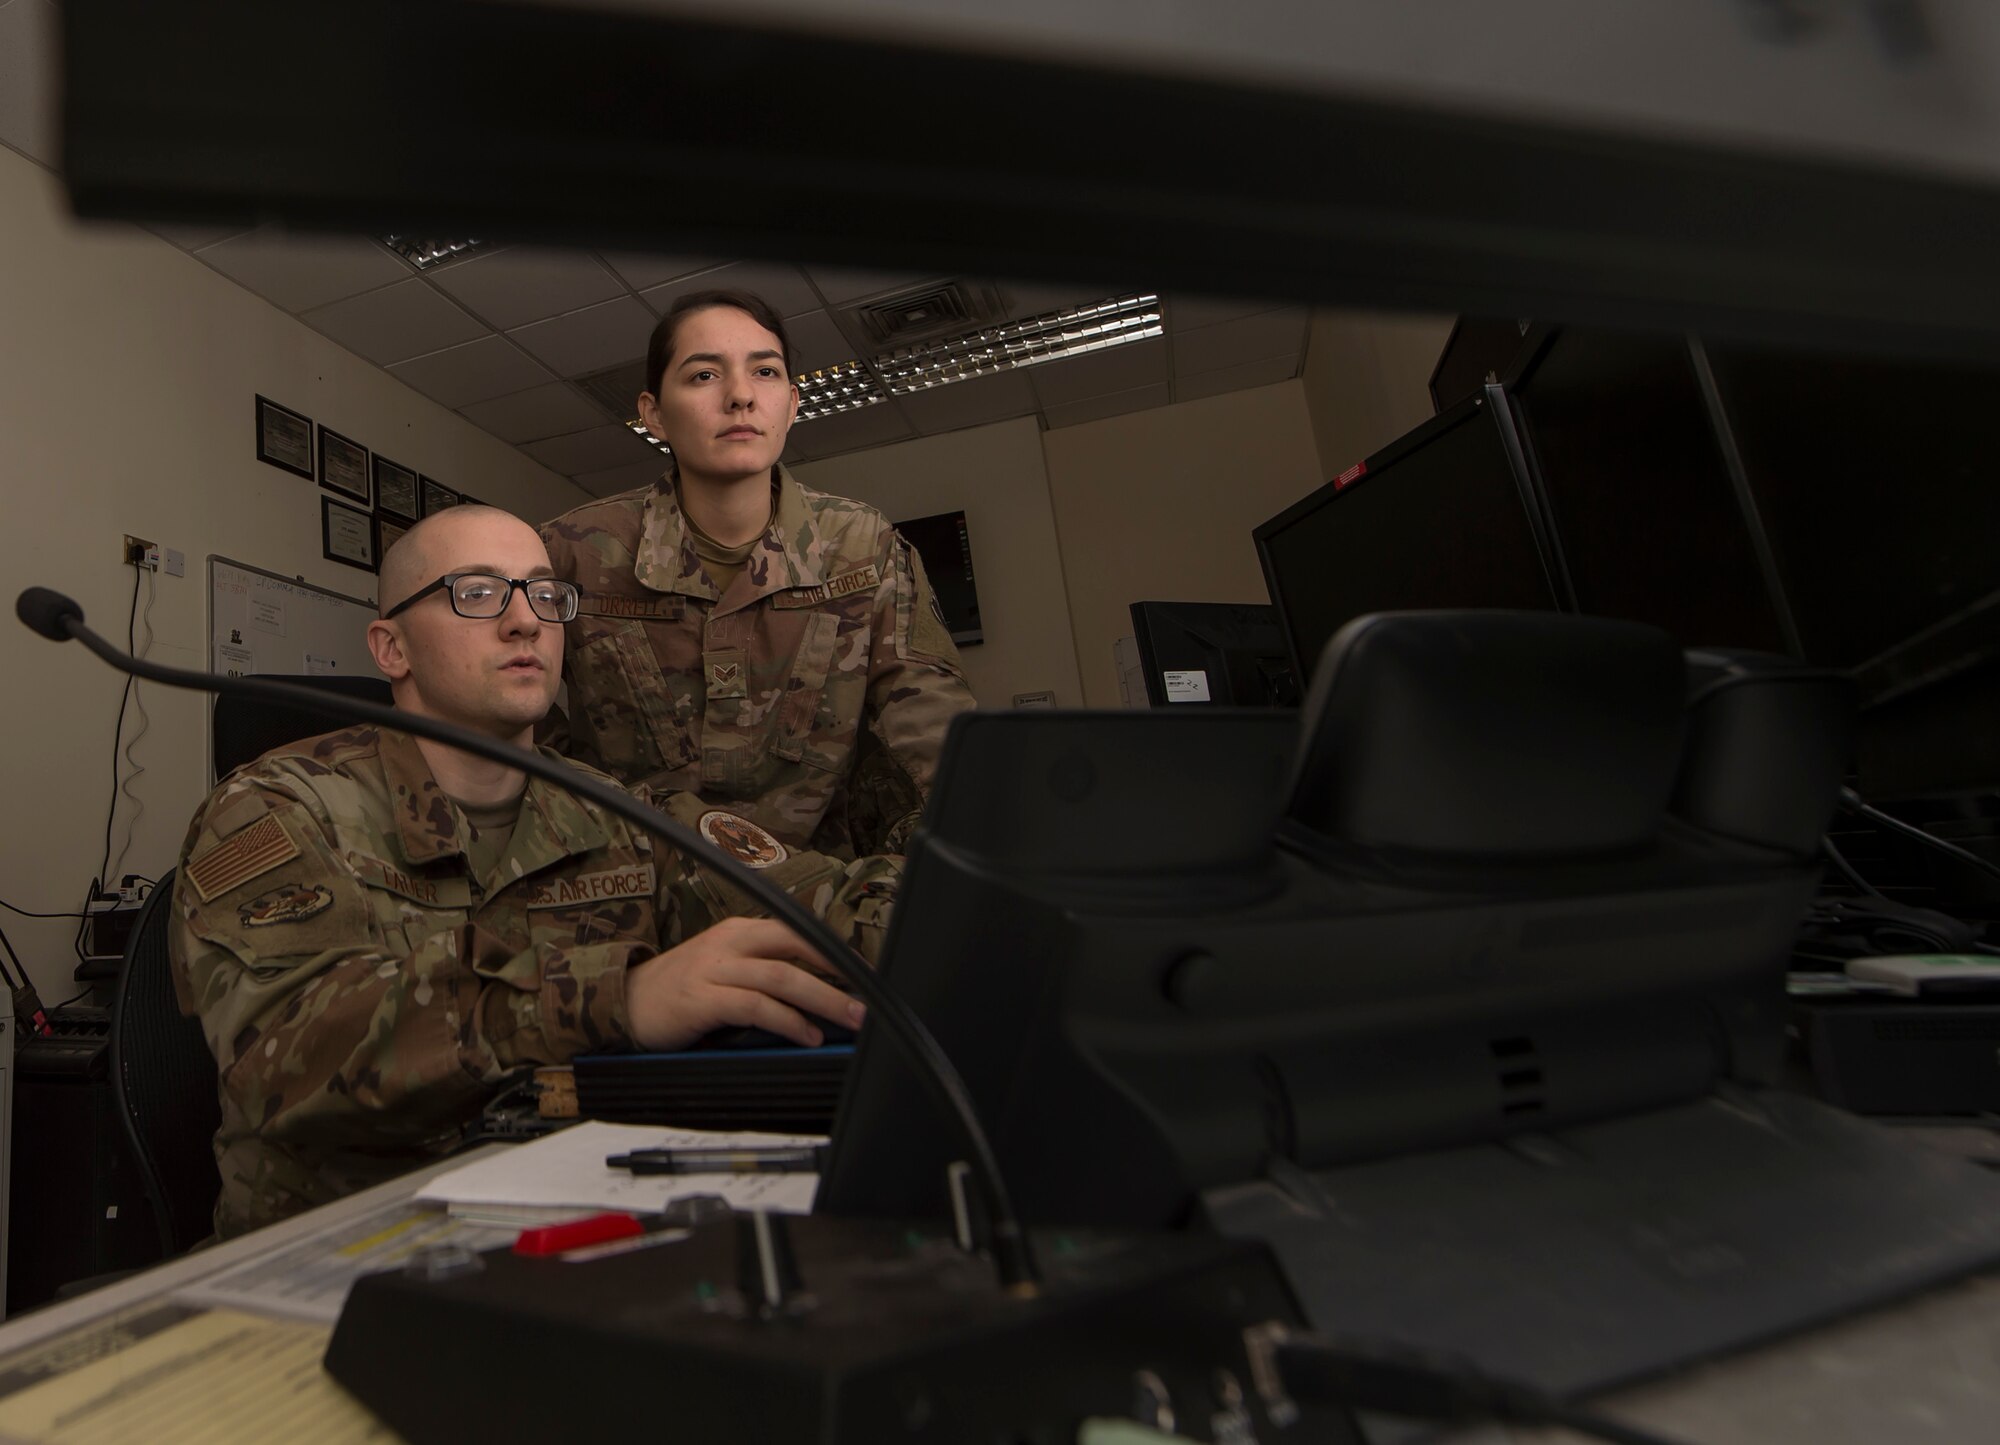 Tech. Sgt. Edward Lauer, 379th Air Expeditionary Wing (AEW) Command Post NCO in charge of command and control operations, briefs Senior Airman Anelle Orrell, 379th AEW Command Post controller, March 22, 2019, at Al Udeid Air Base, Qatar. Airmen from the command post are responsible for gathering and relaying information to entities across base to include aircraft maintenance requirements, security forces incidents, and notifications that ensure the safety of Airmen and other assets on base. (U.S. Air Force photo by Tech. Sgt. Christopher Hubenthal)